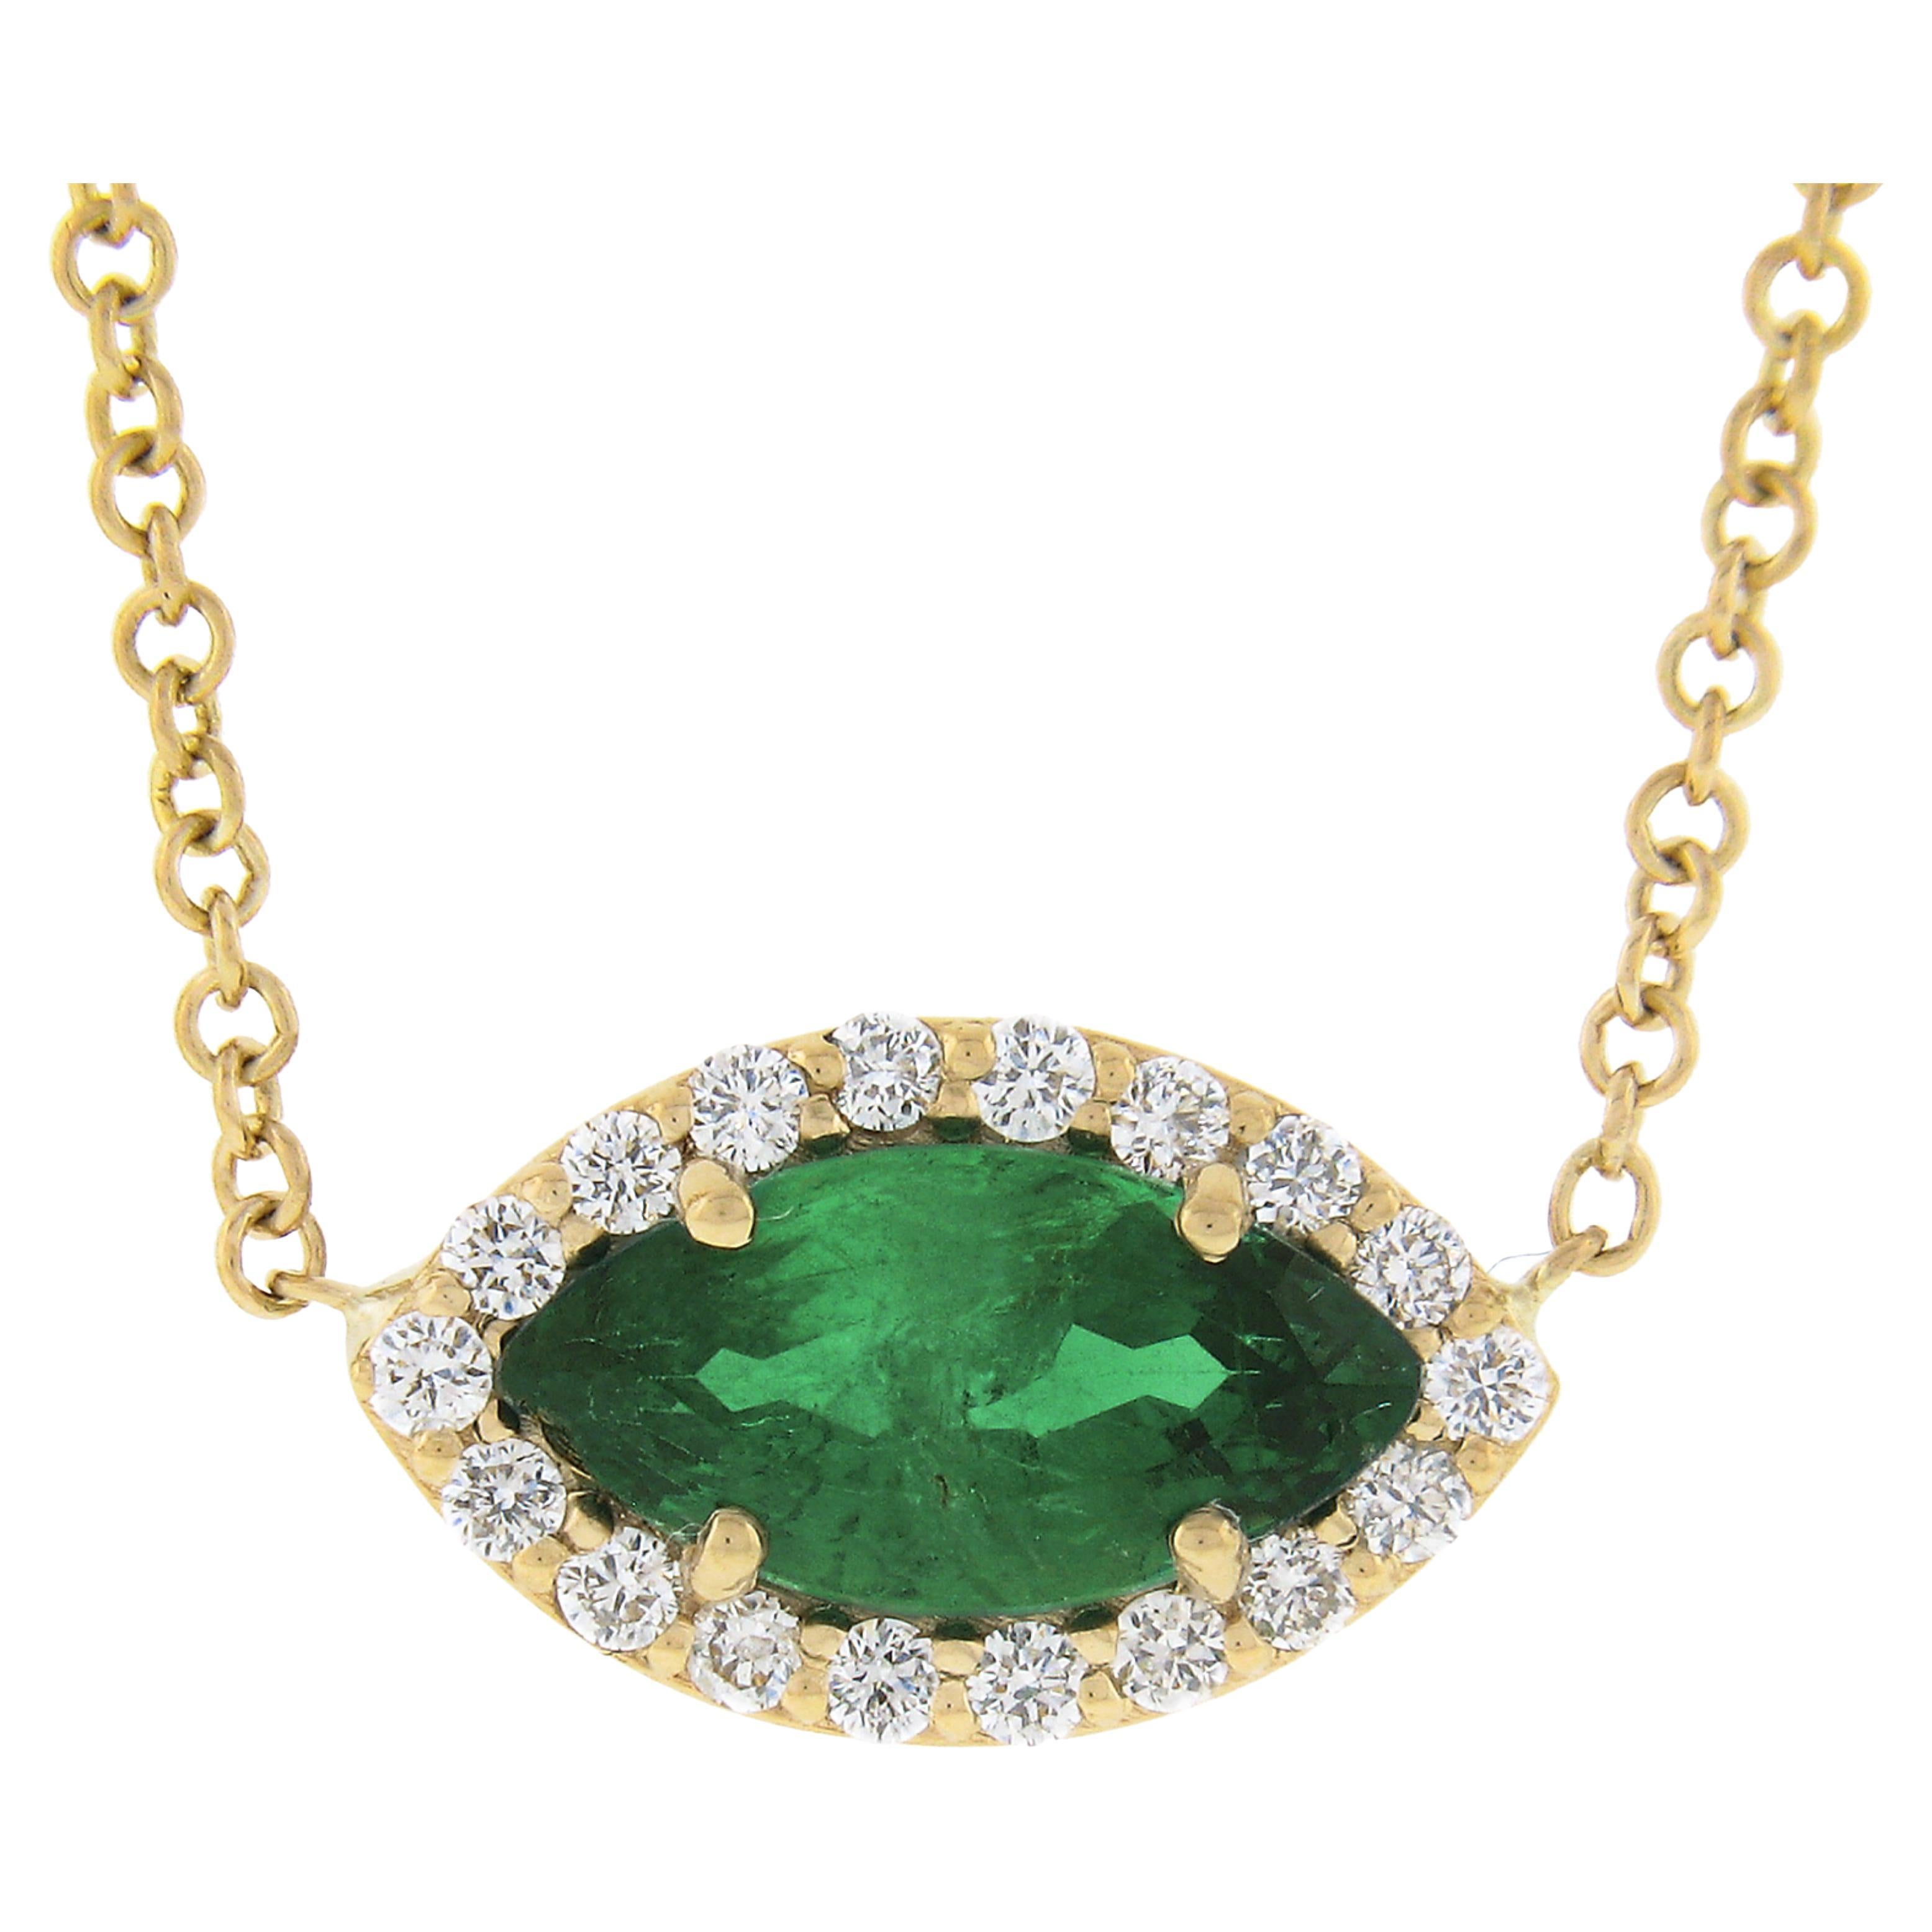 NEW 18k Gold .78ct GIA Marquise Emerald Solitaire Diamond Halo Pendant Necklace